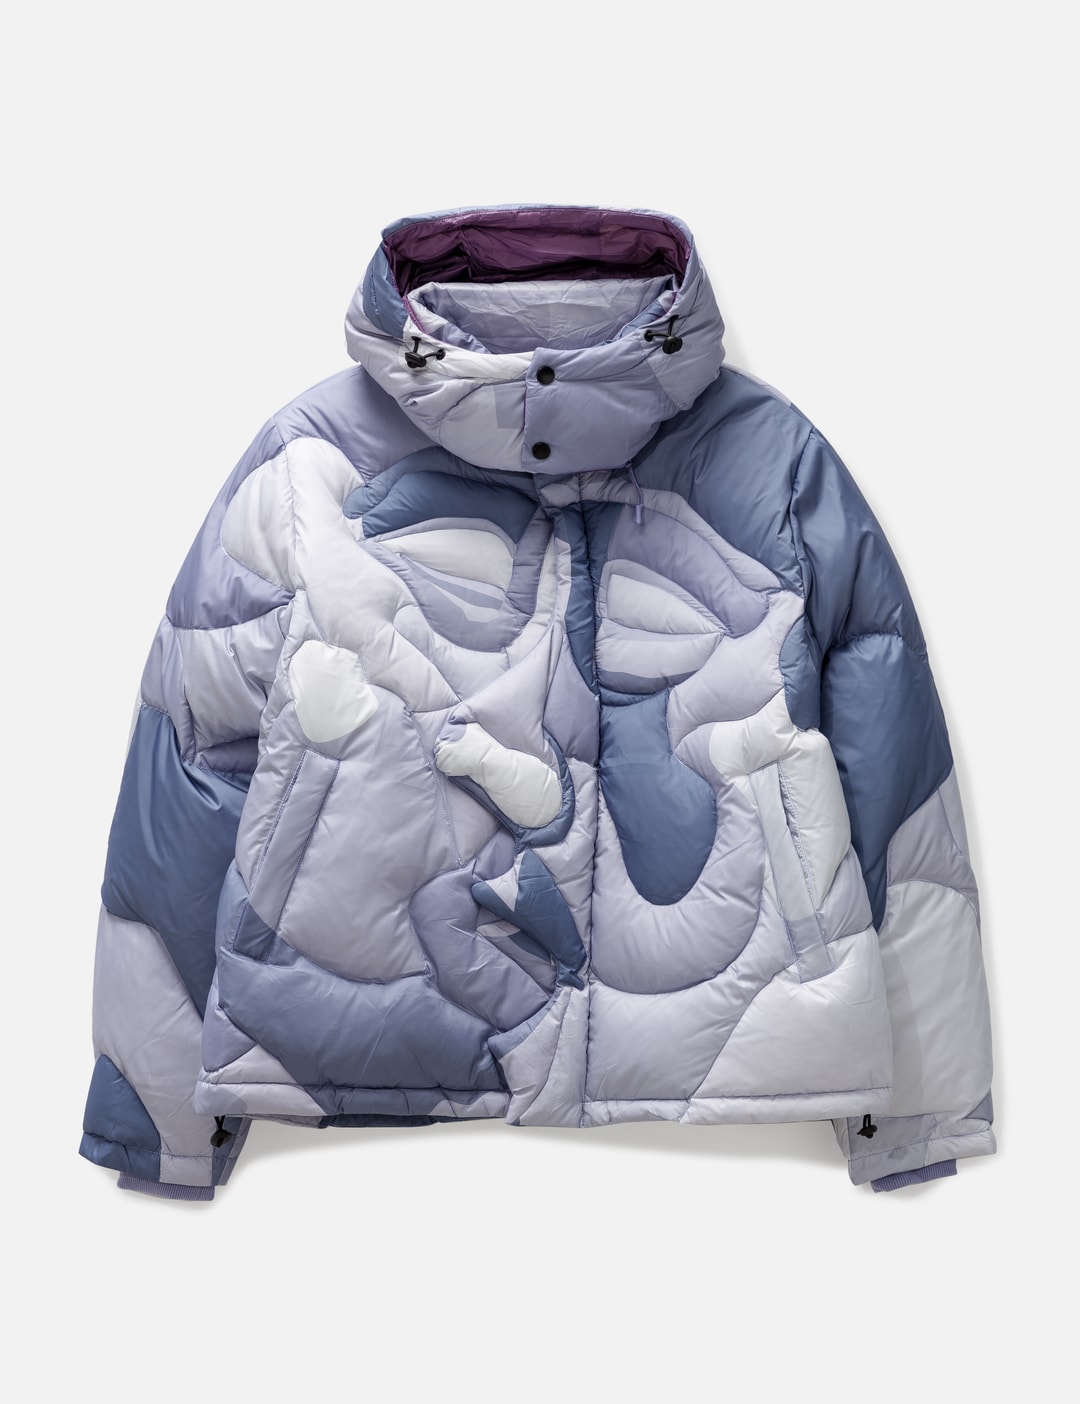 KidSuper - Kissing Puffer Jacket | HBX - Globally Curated Fashion and ...